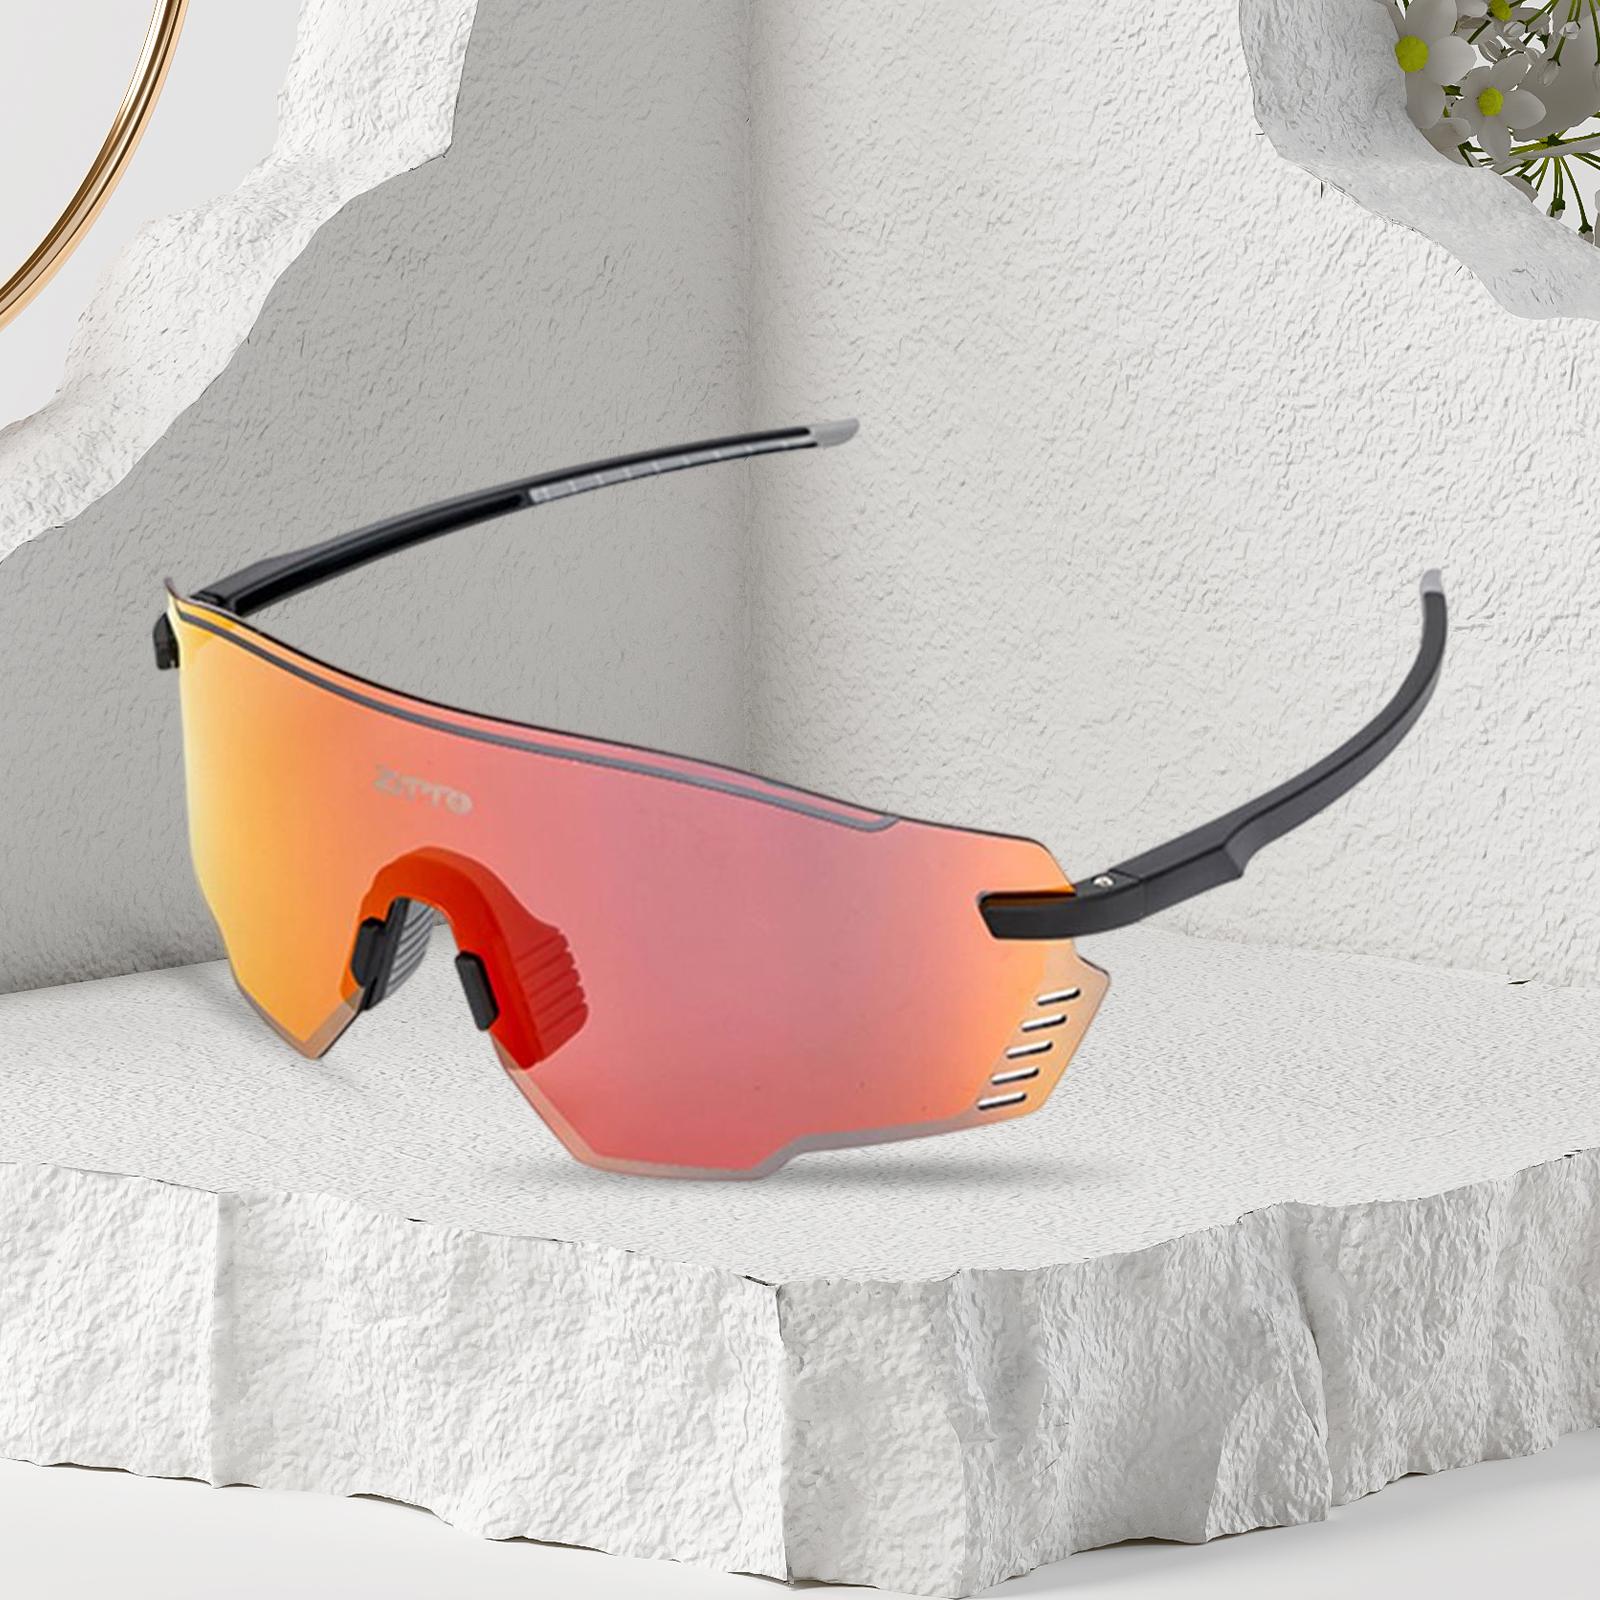 Outdoor Cycling Glasses Sports Sunglasses Eye Protection for Fishing Hiking Black Red